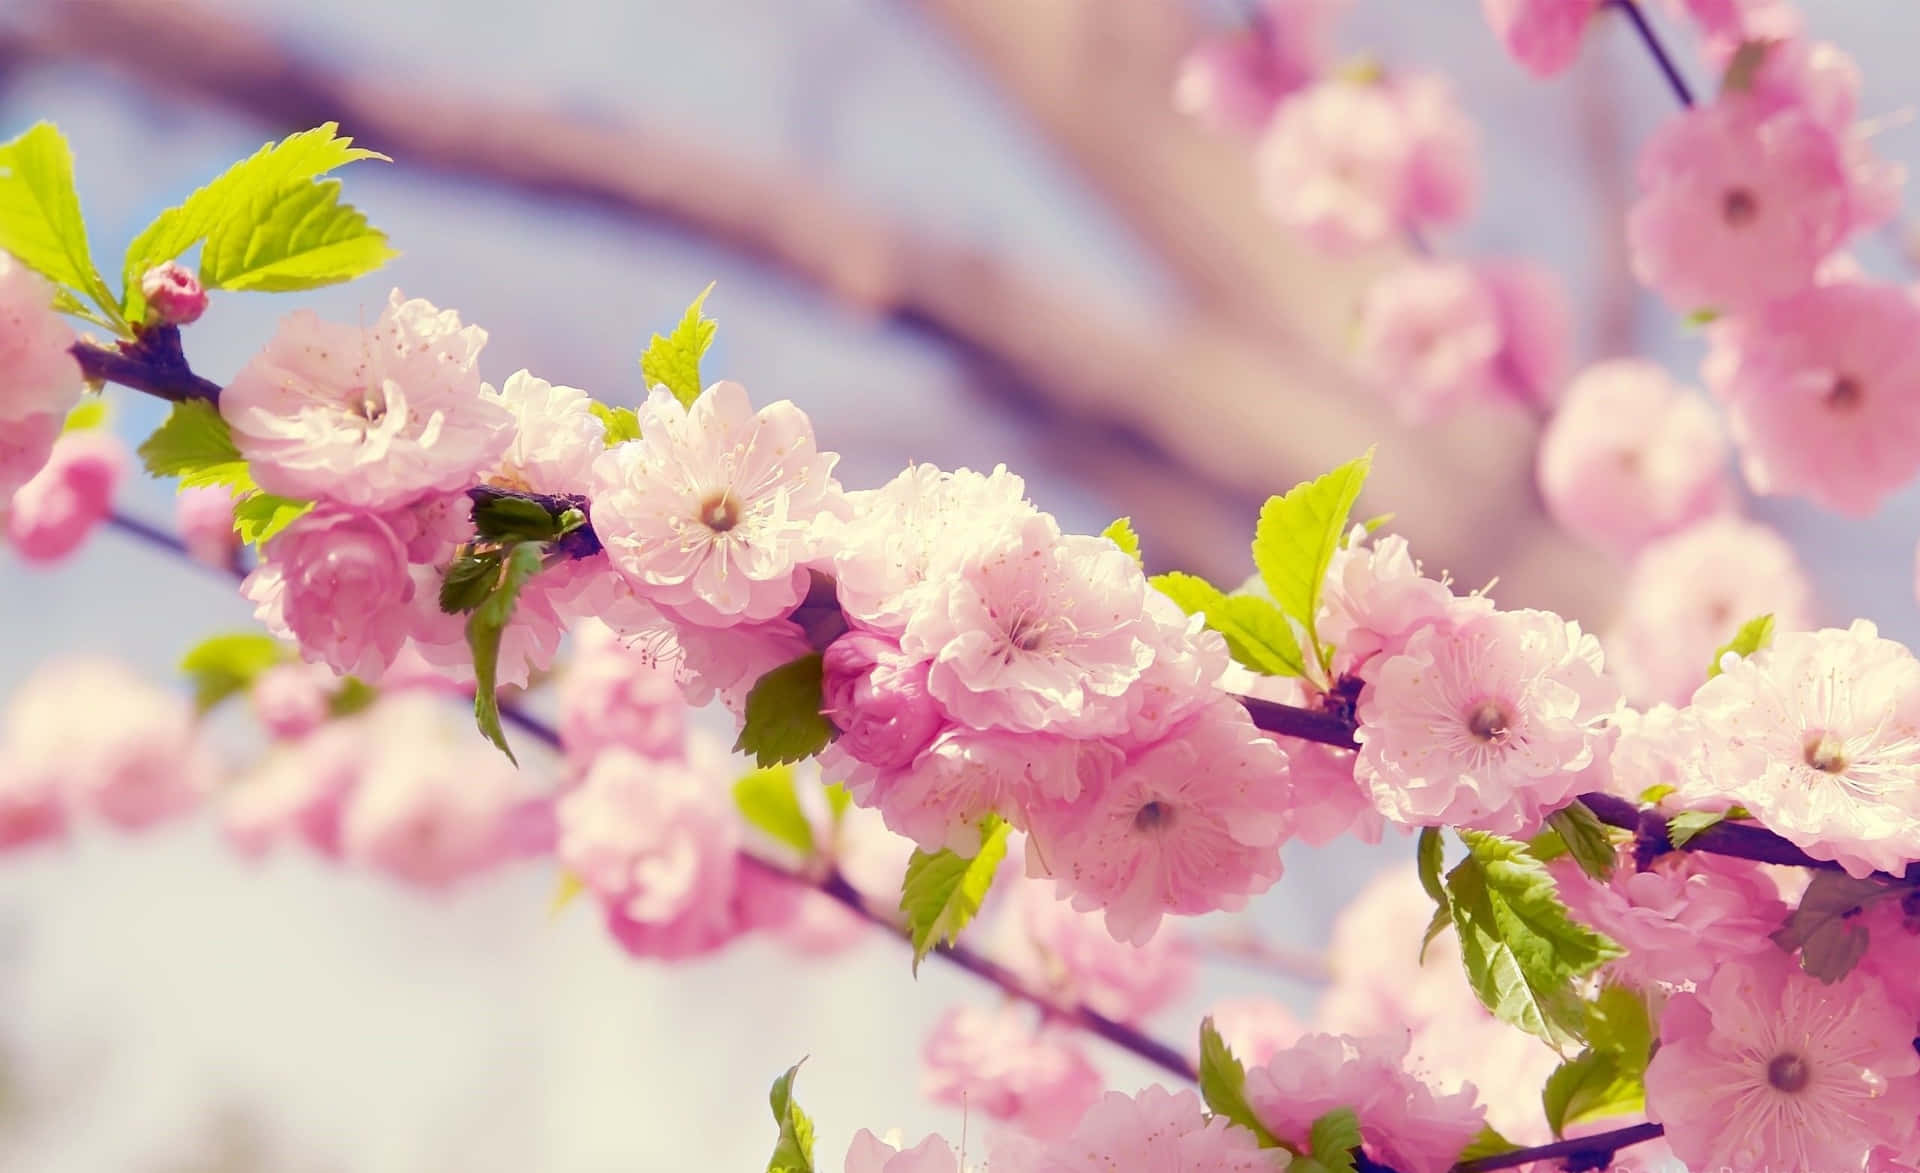 Pink Cherry Blossoms On A Branch With Green Leaves